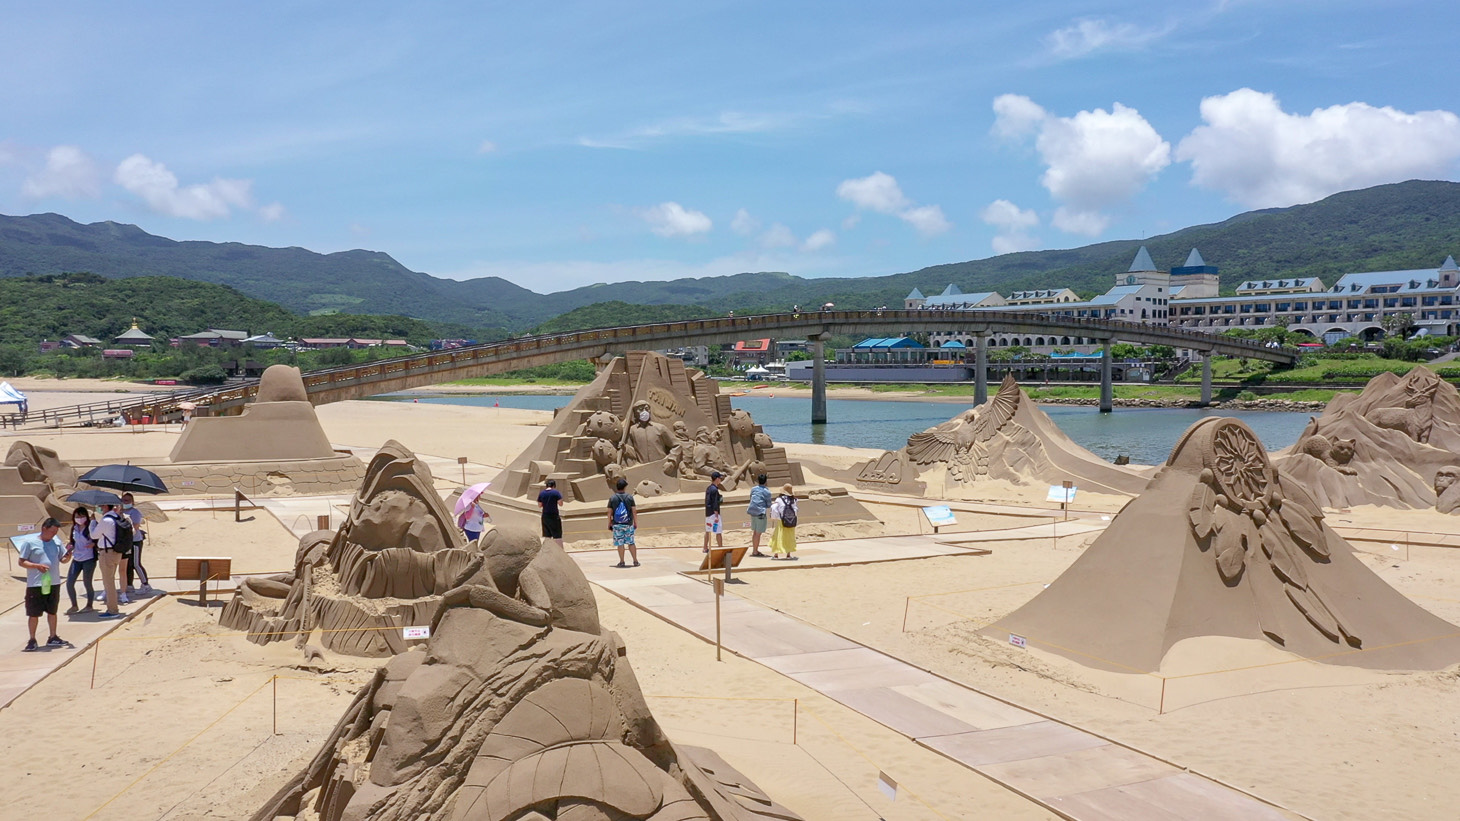 There are 32 sand sculptures this year